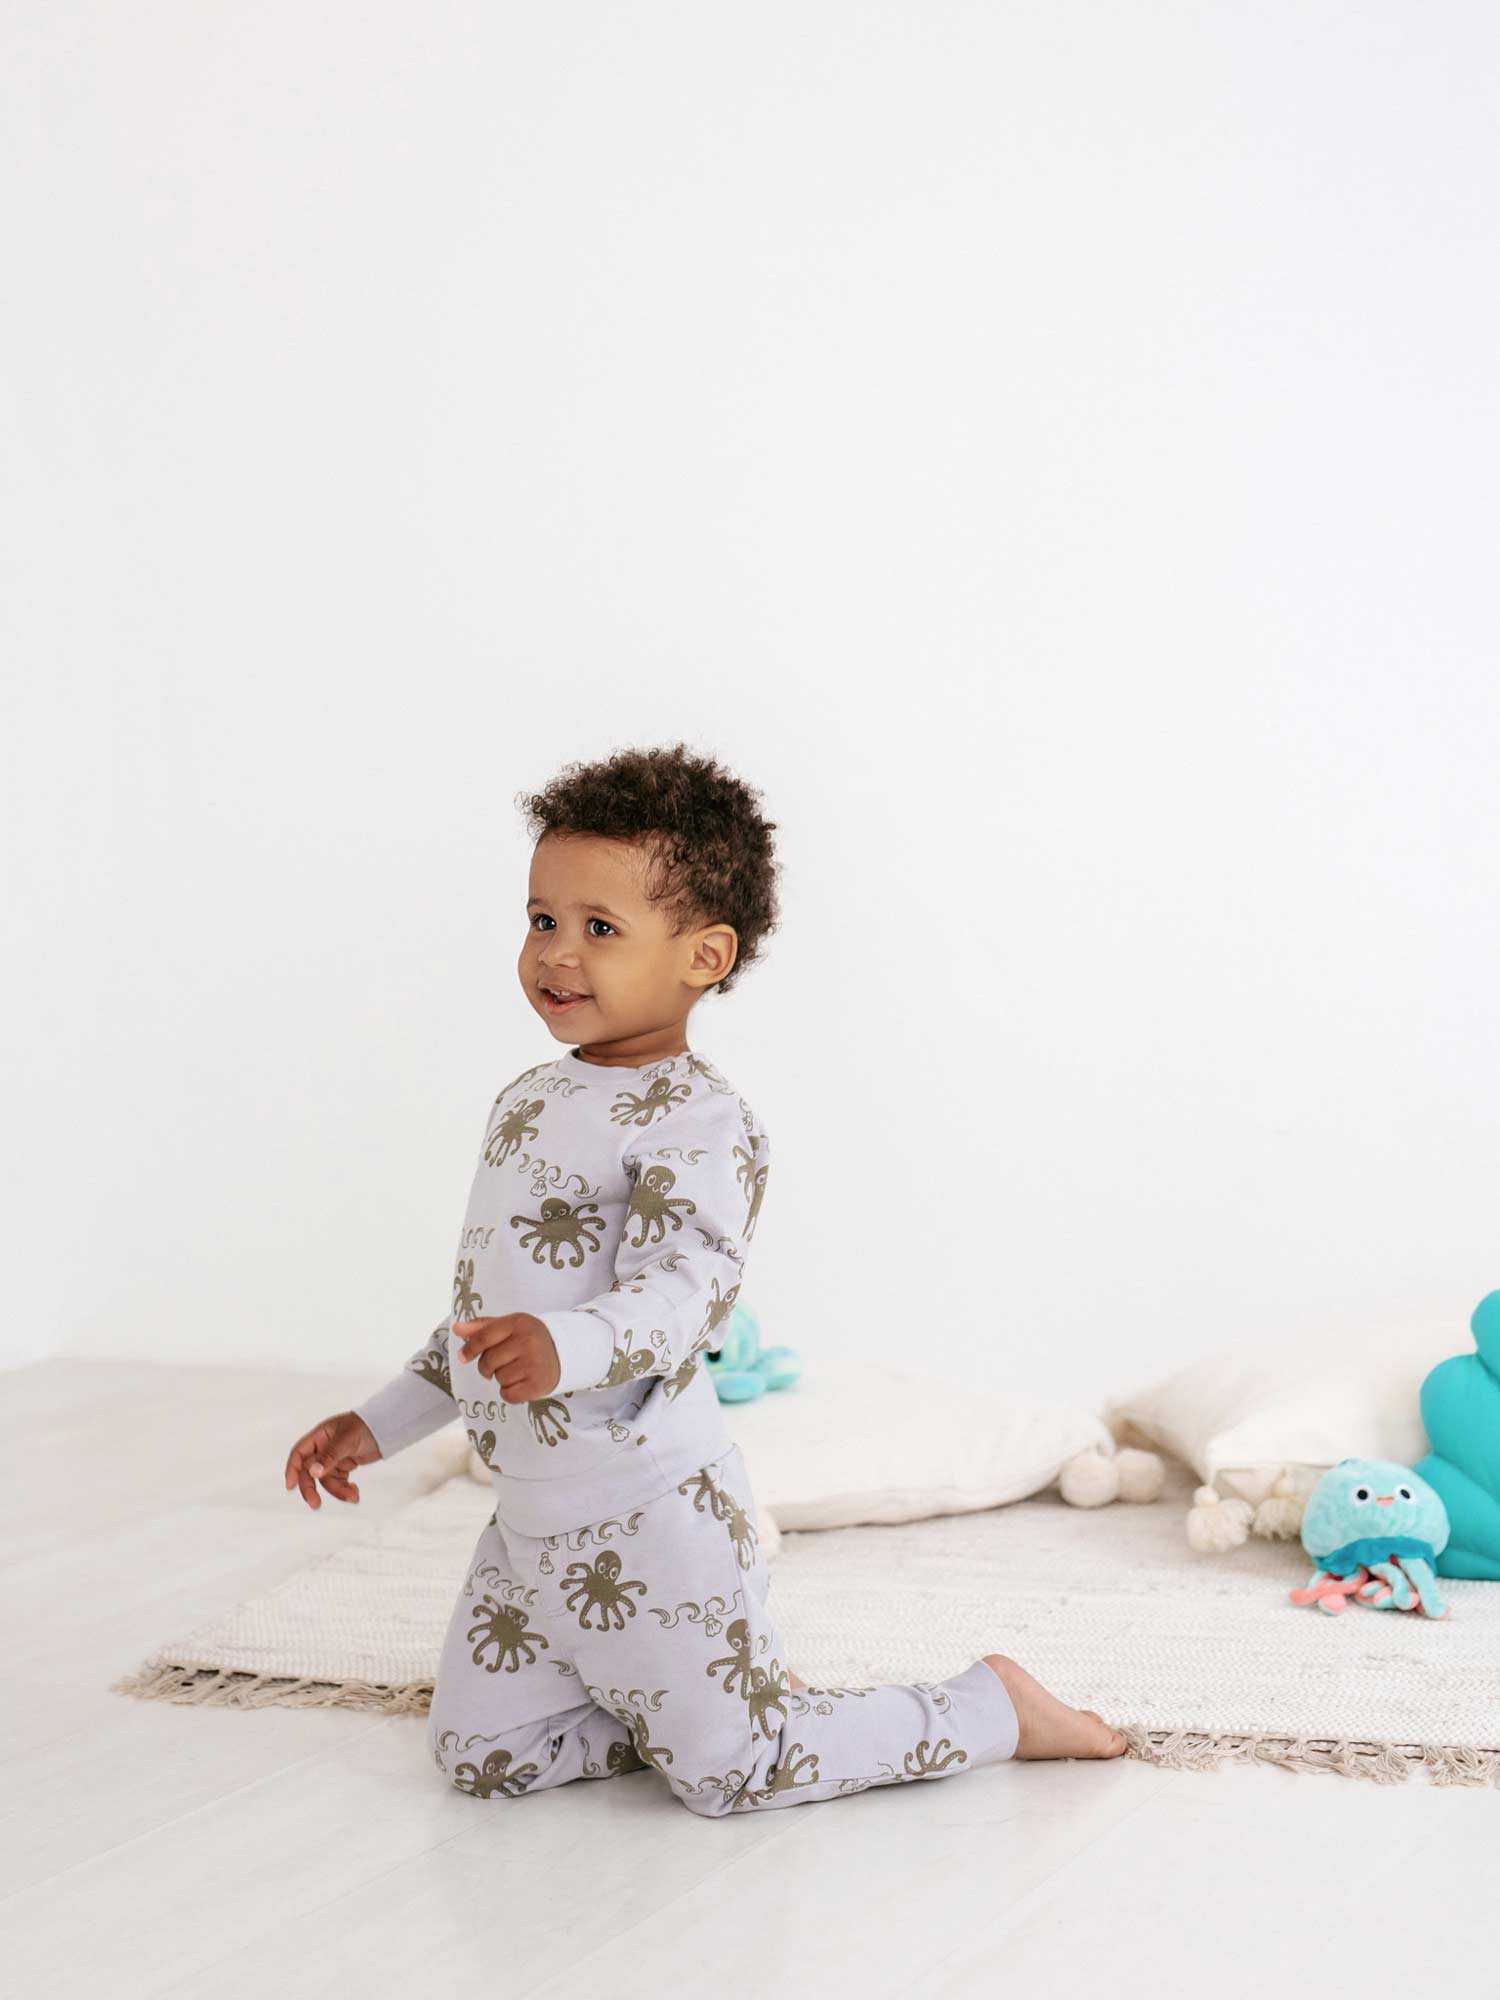 The heavy ribbed cuffs around waist and arms in Baby Jumper Sea Friends 337 offer added comfort and warmth for your little one – perfect for fun days at home with family or adventuring in the outdoors.